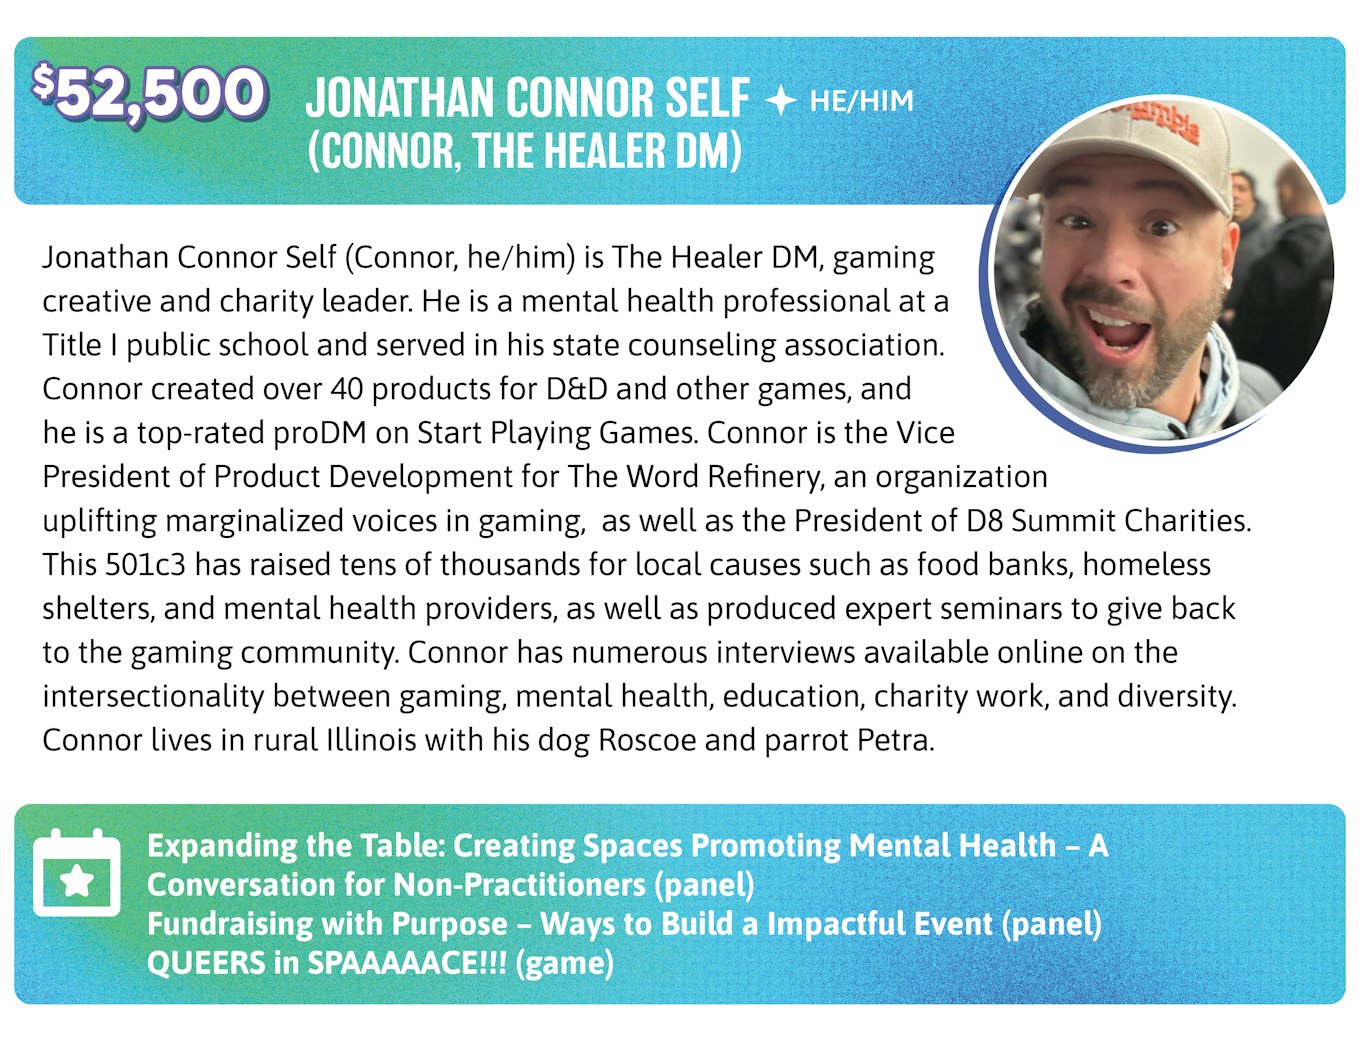 52,500. Jonathan Connor Self (Connor, he/him) is The Healer DM, gaming creative and charity leader. He is a mental health professional at a Title I public school and served in his state counseling association. Connor created over 40 products for D&D and other games, and he is a top-rated proDM on Start Playing Games. Connor is the Vice President of Product Development for The Word Refinery, an organization uplifting marginalized voices in gaming,  as well as the President of D8 Summit Charities. This 501c3 has raised tens of thousands for local causes such as food banks, homeless shelters, and mental health providers, as well as produced expert seminars to give back to the gaming community. Connor has numerous interviews available online on the intersectionality between gaming, mental health, education, charity work, and diversity. Connor lives in rural Illinois with his dog Roscoe and parrot Petra.